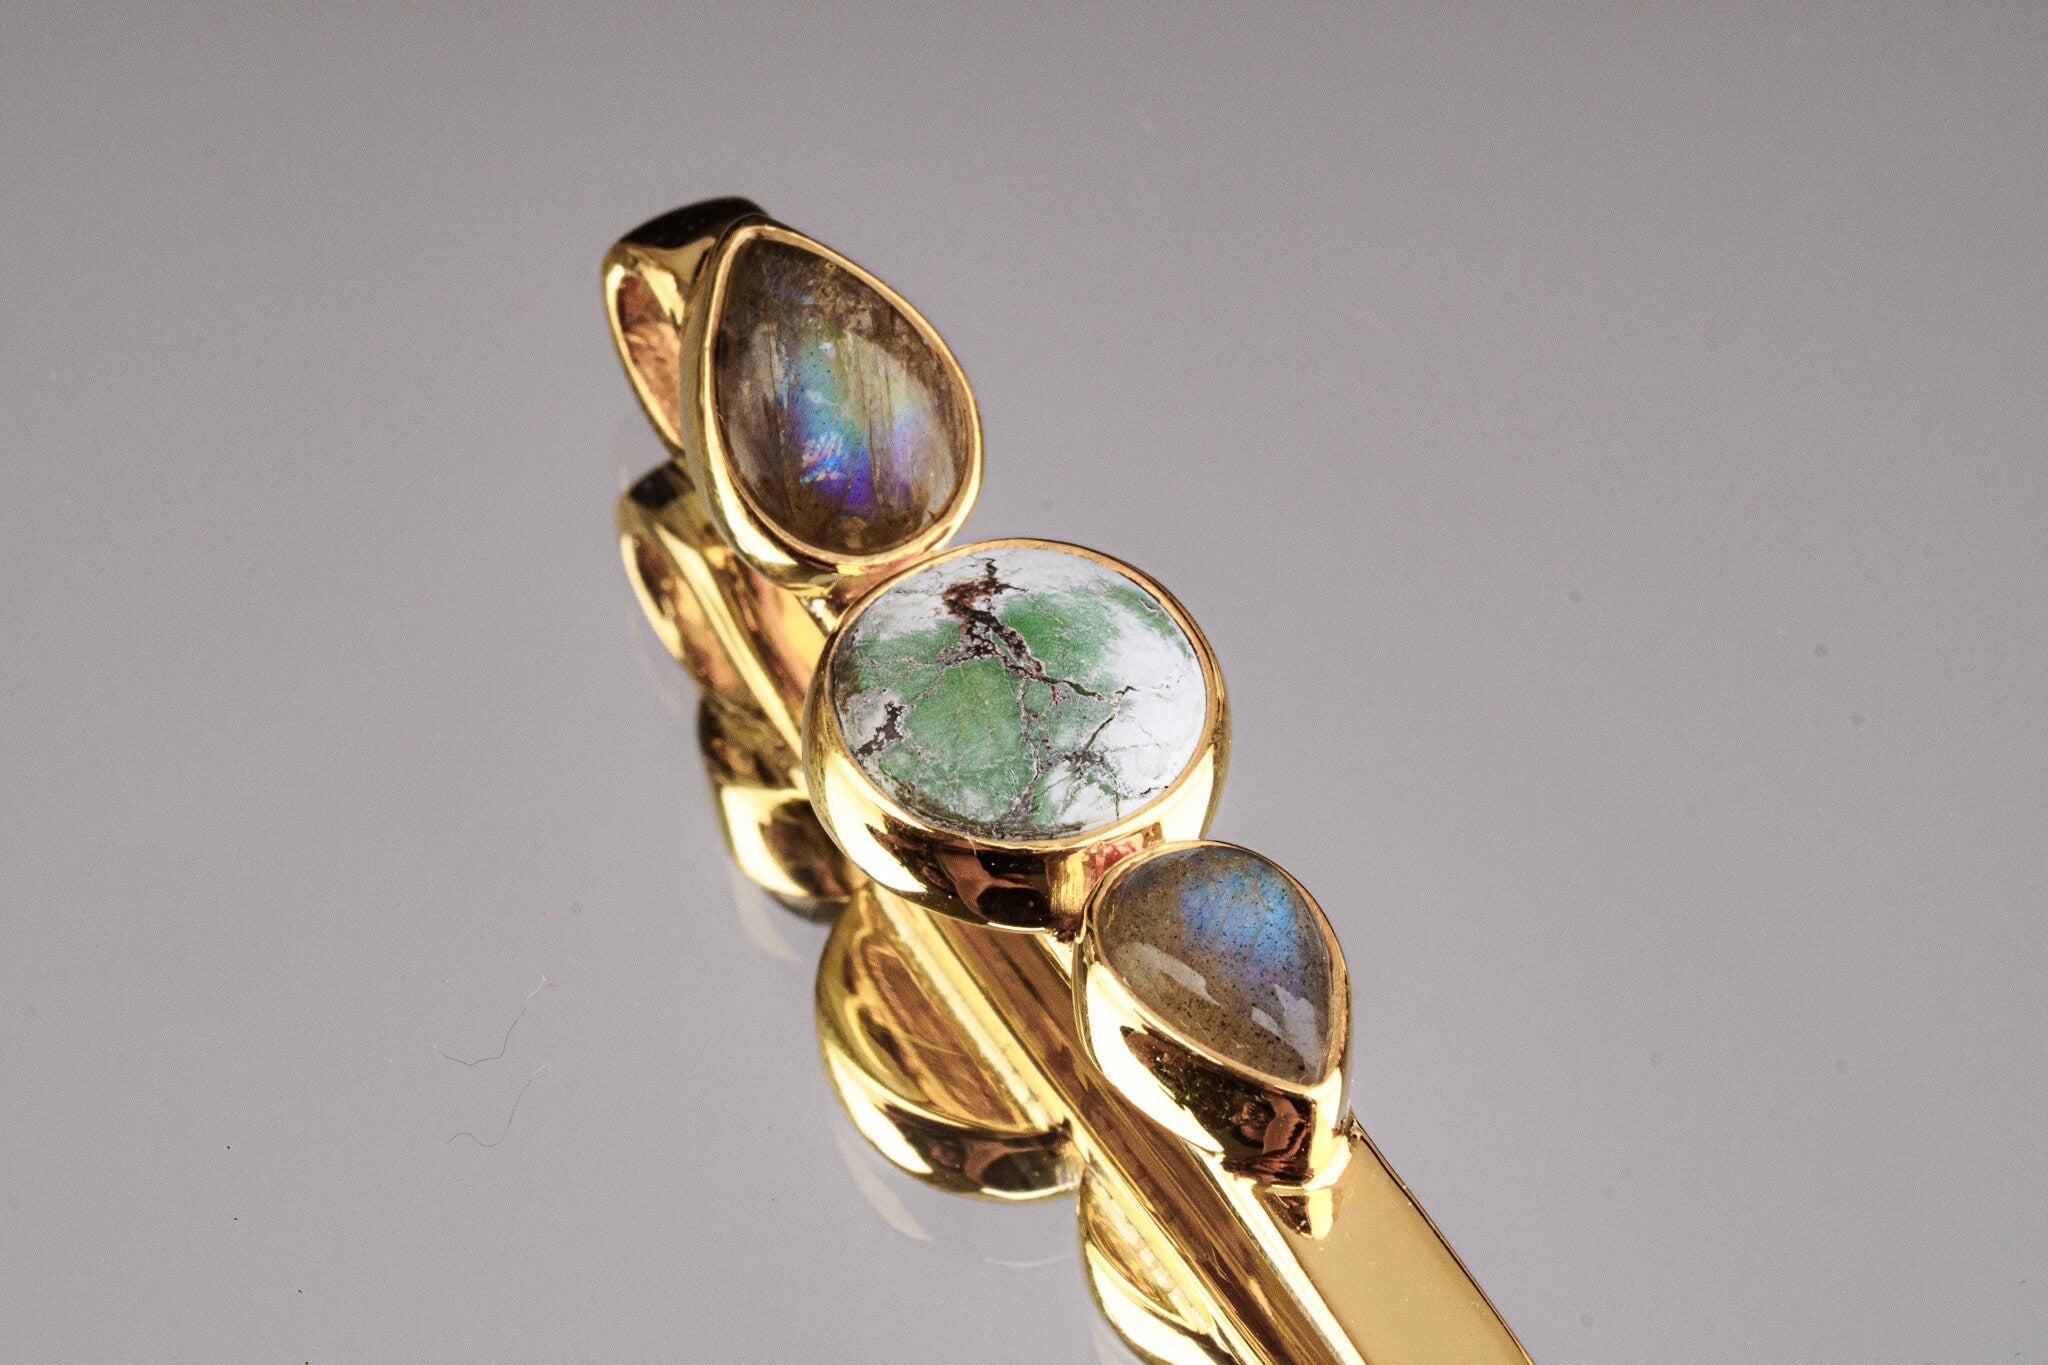 Gem Labradorite & Chrysocolla - Inverted Indian Ceremonial Spoon / Scoop Necklace - 16K Gold plated Cast Sterling Silver